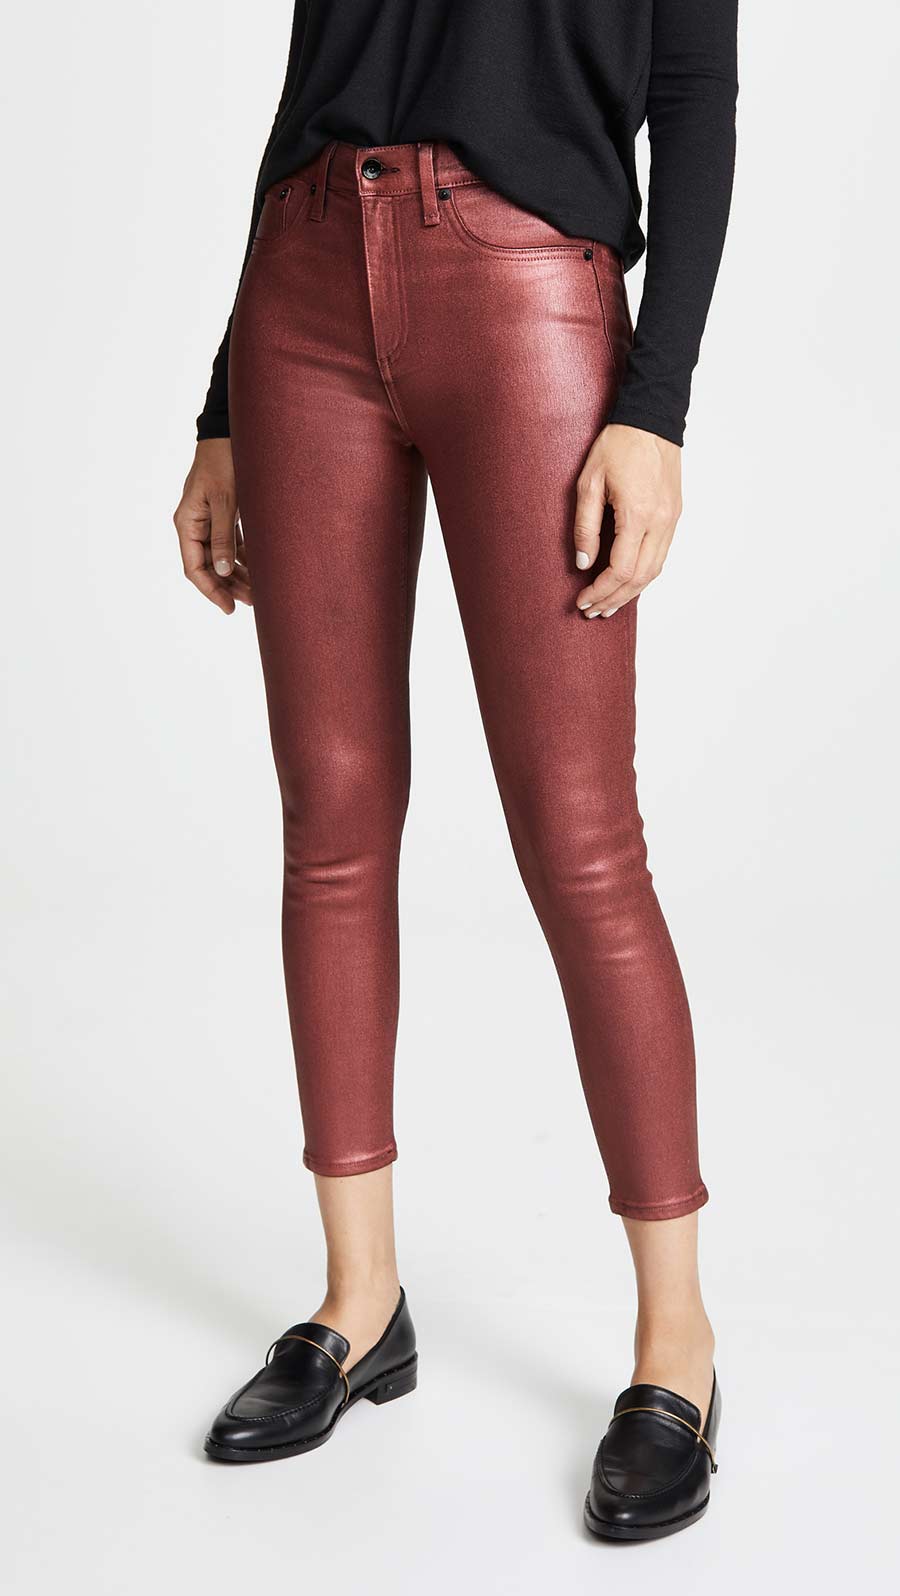 8 Must Have Festive Metallic Holiday Jeans - THE JEANS BLOG